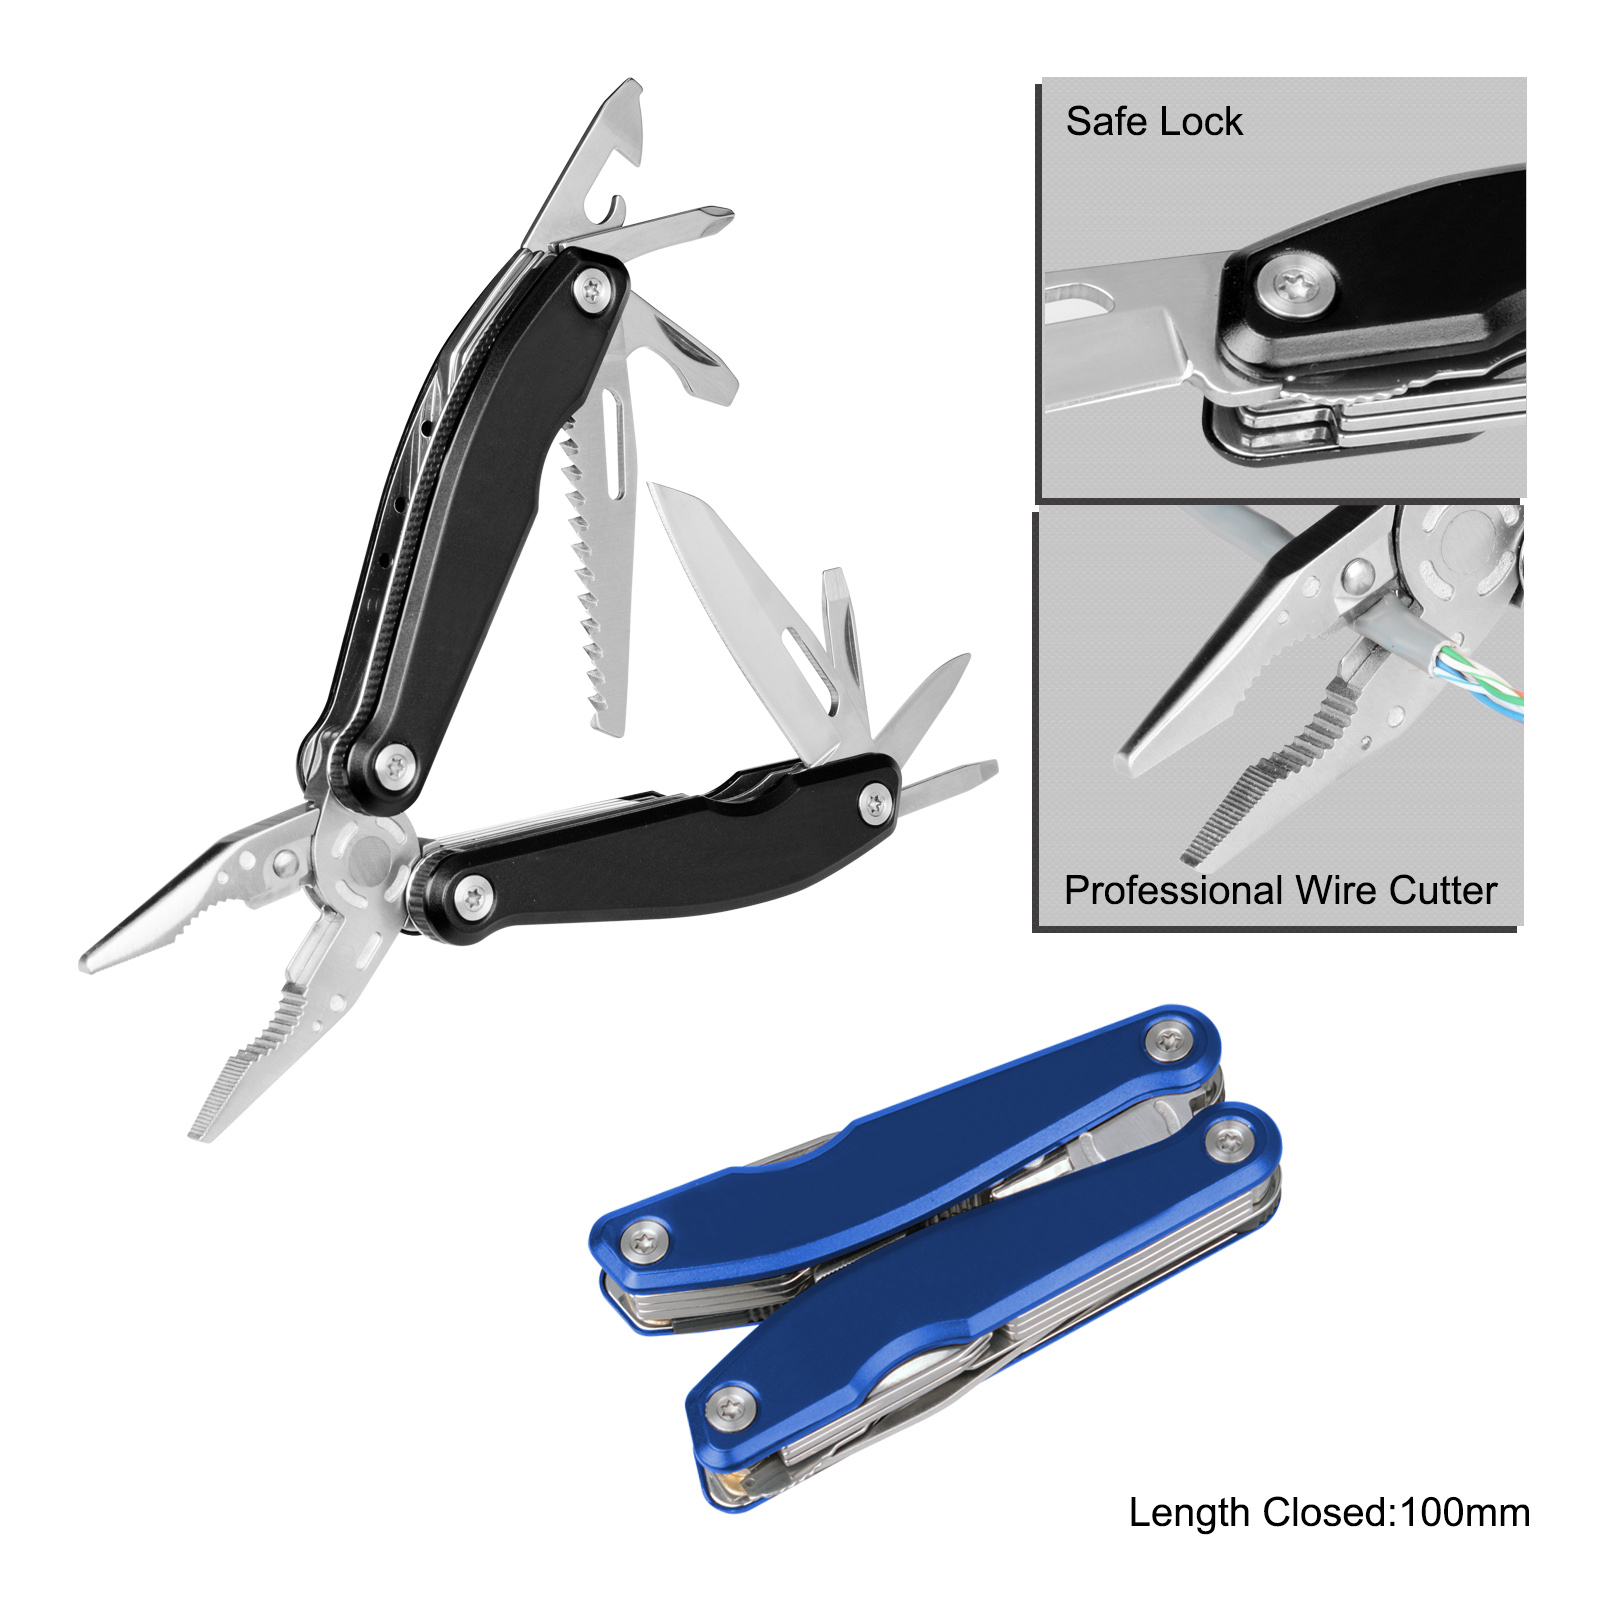 #8300 Top Quality Multitools with Safe Lock